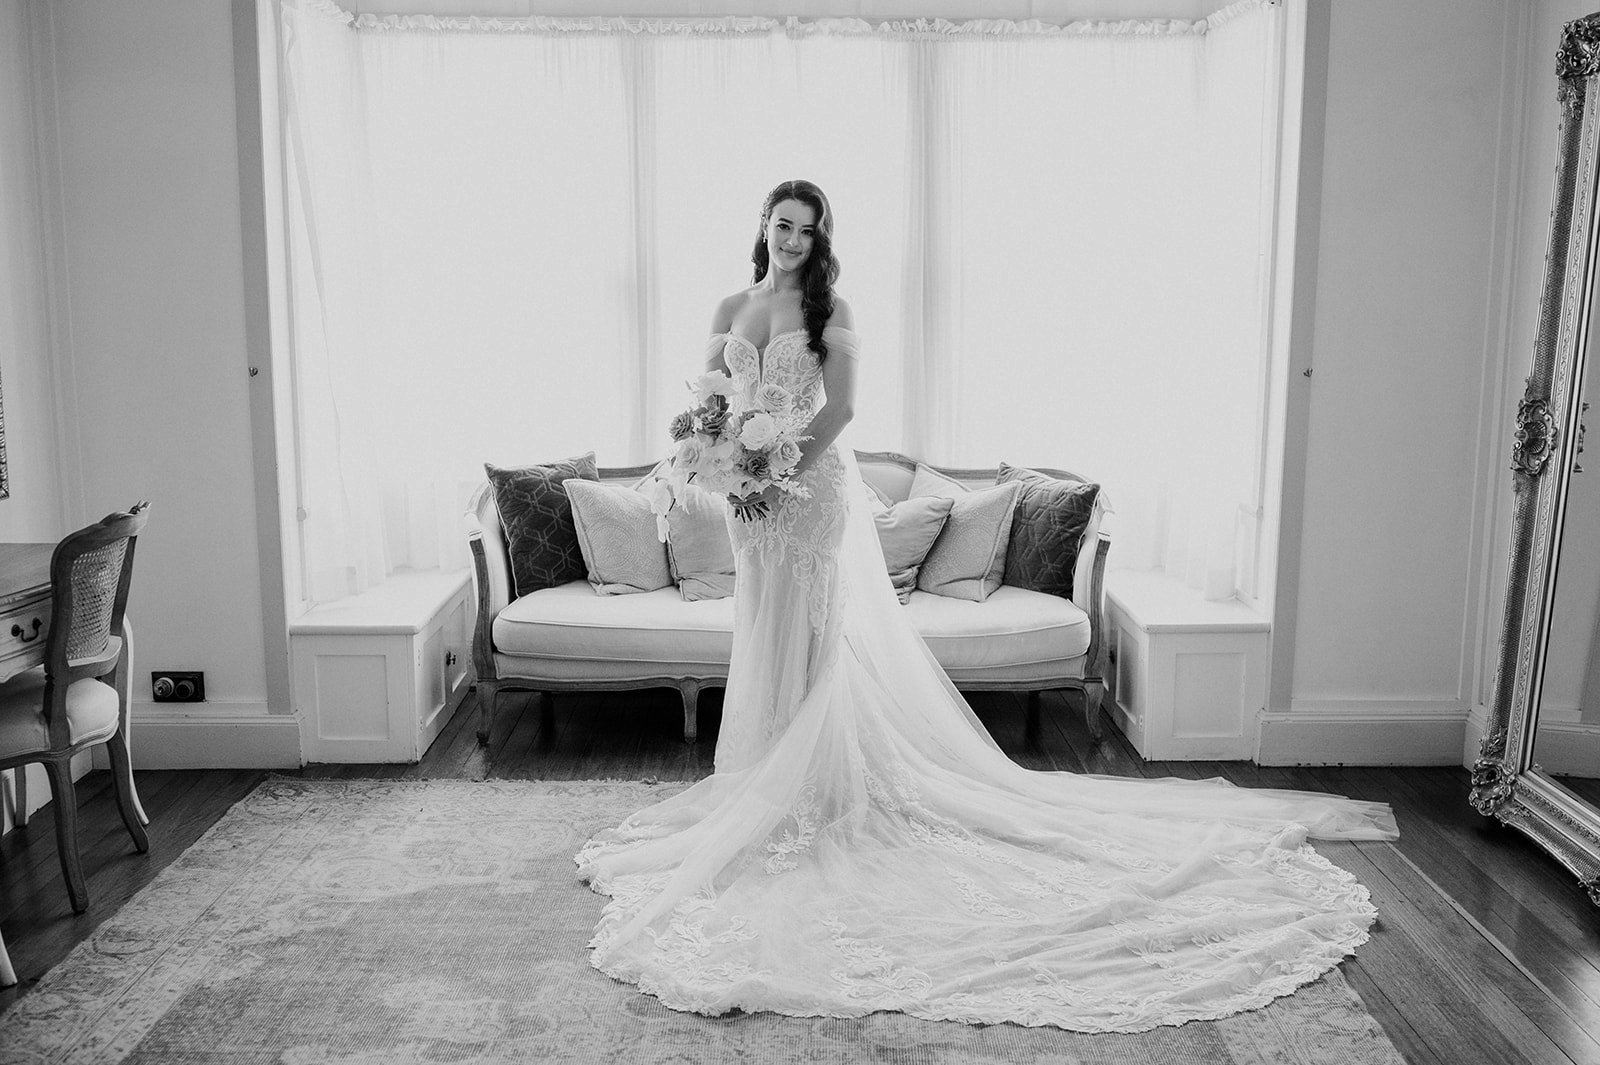 Bride standing in wedding dress in front of couch